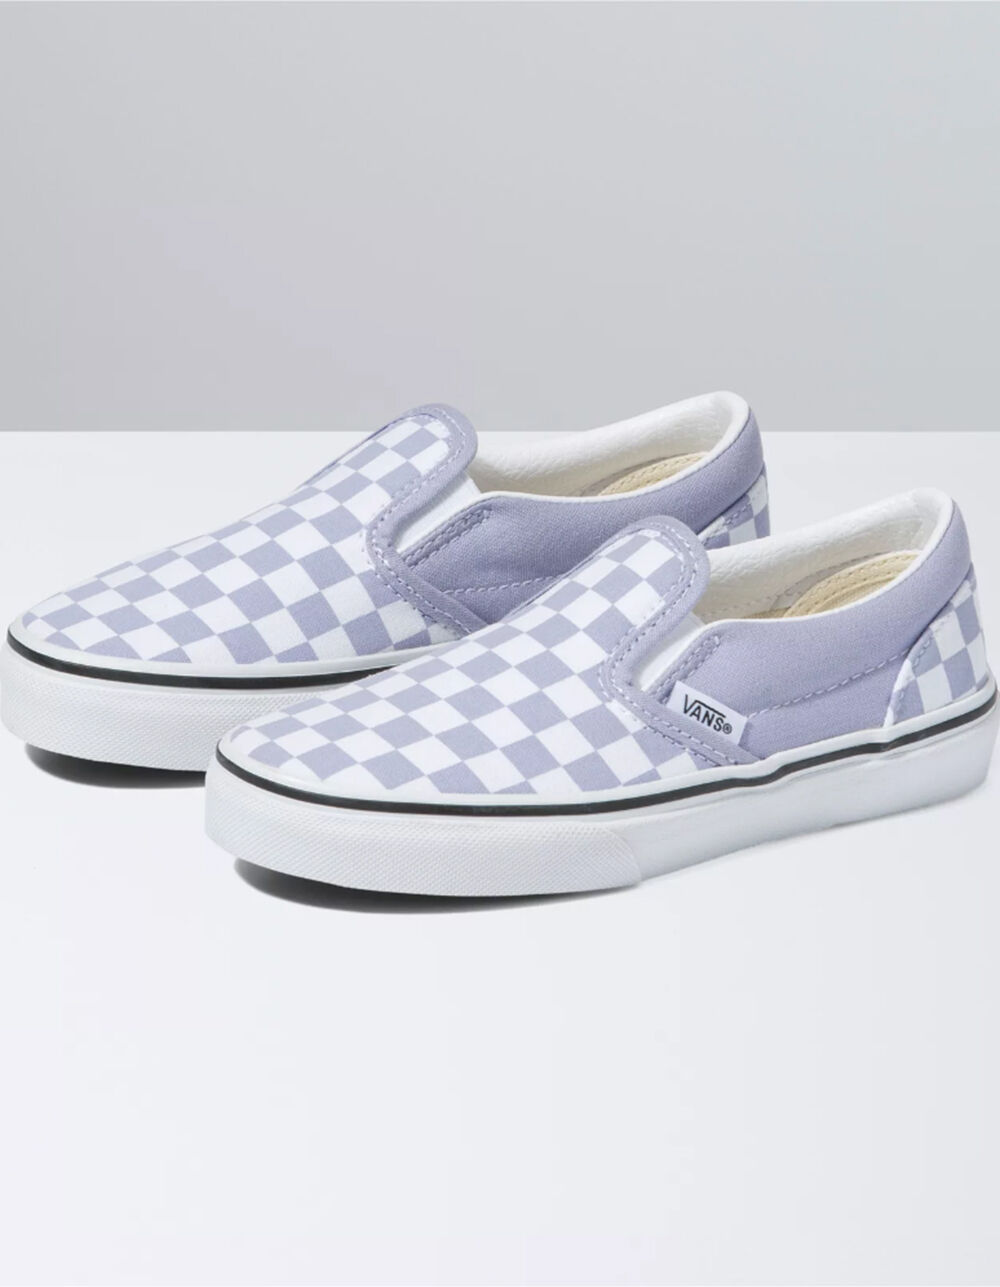 VANS Checkerboard Girls Classic Slip-on Shoes - LILAC | Tillys